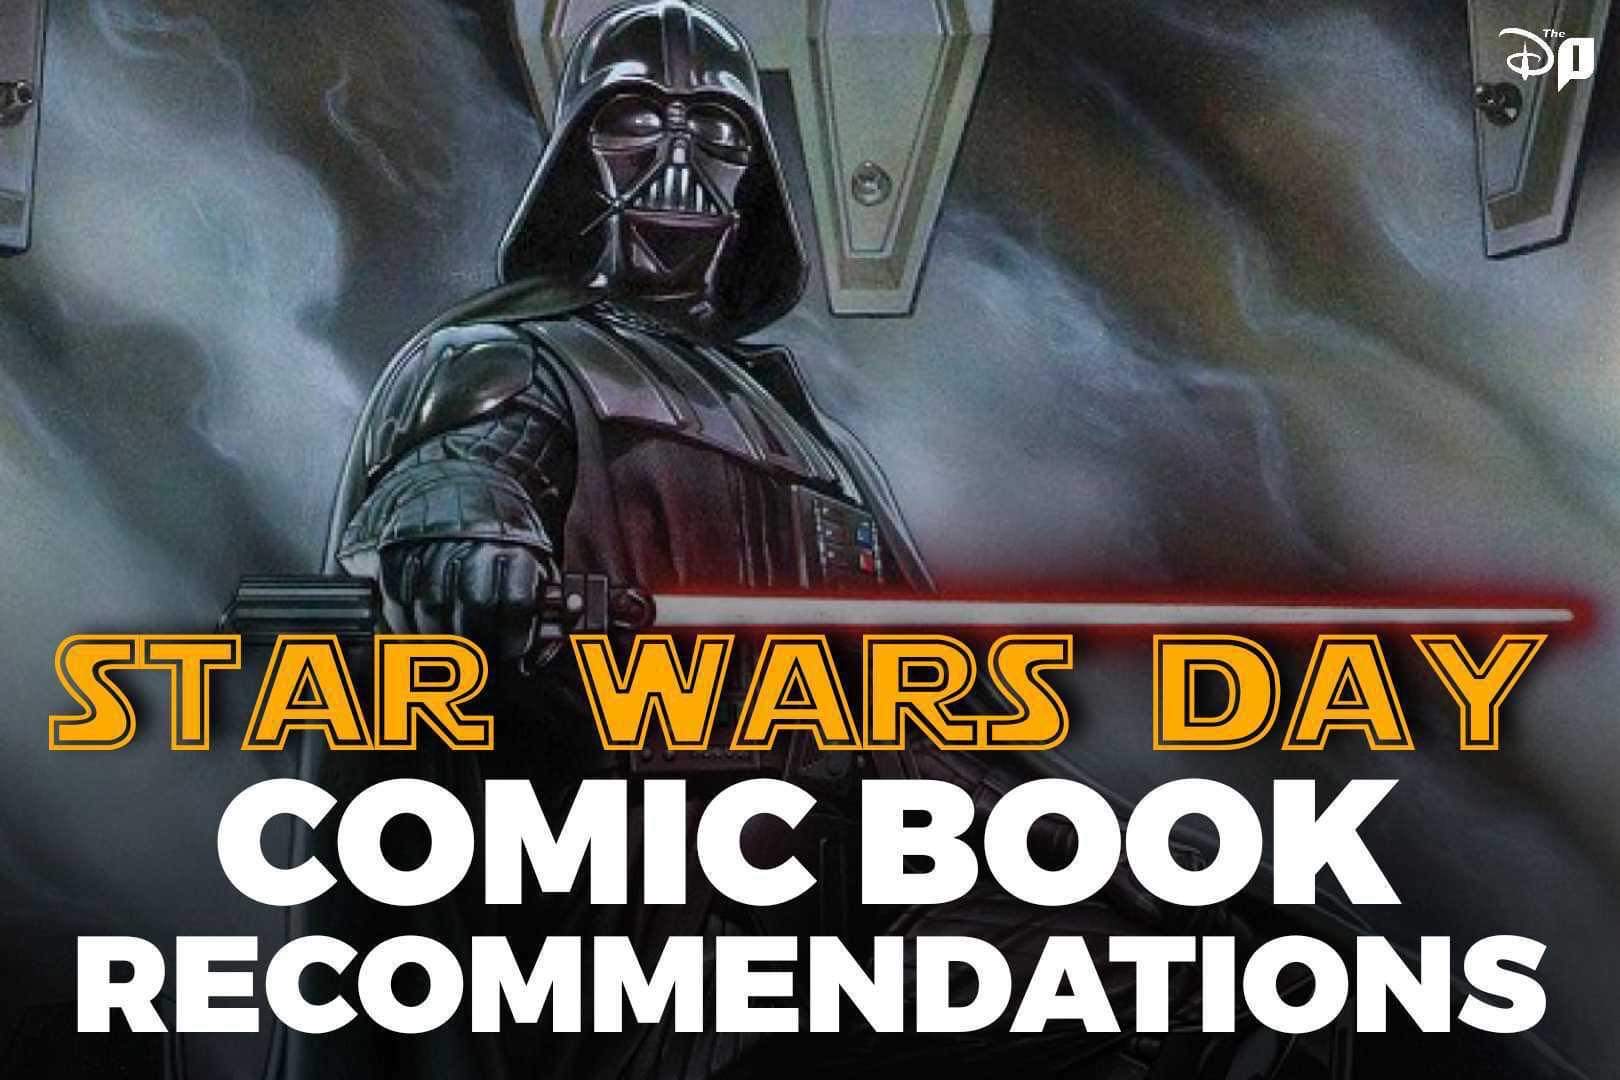 Star Wars Day: Comic Book Recommendations